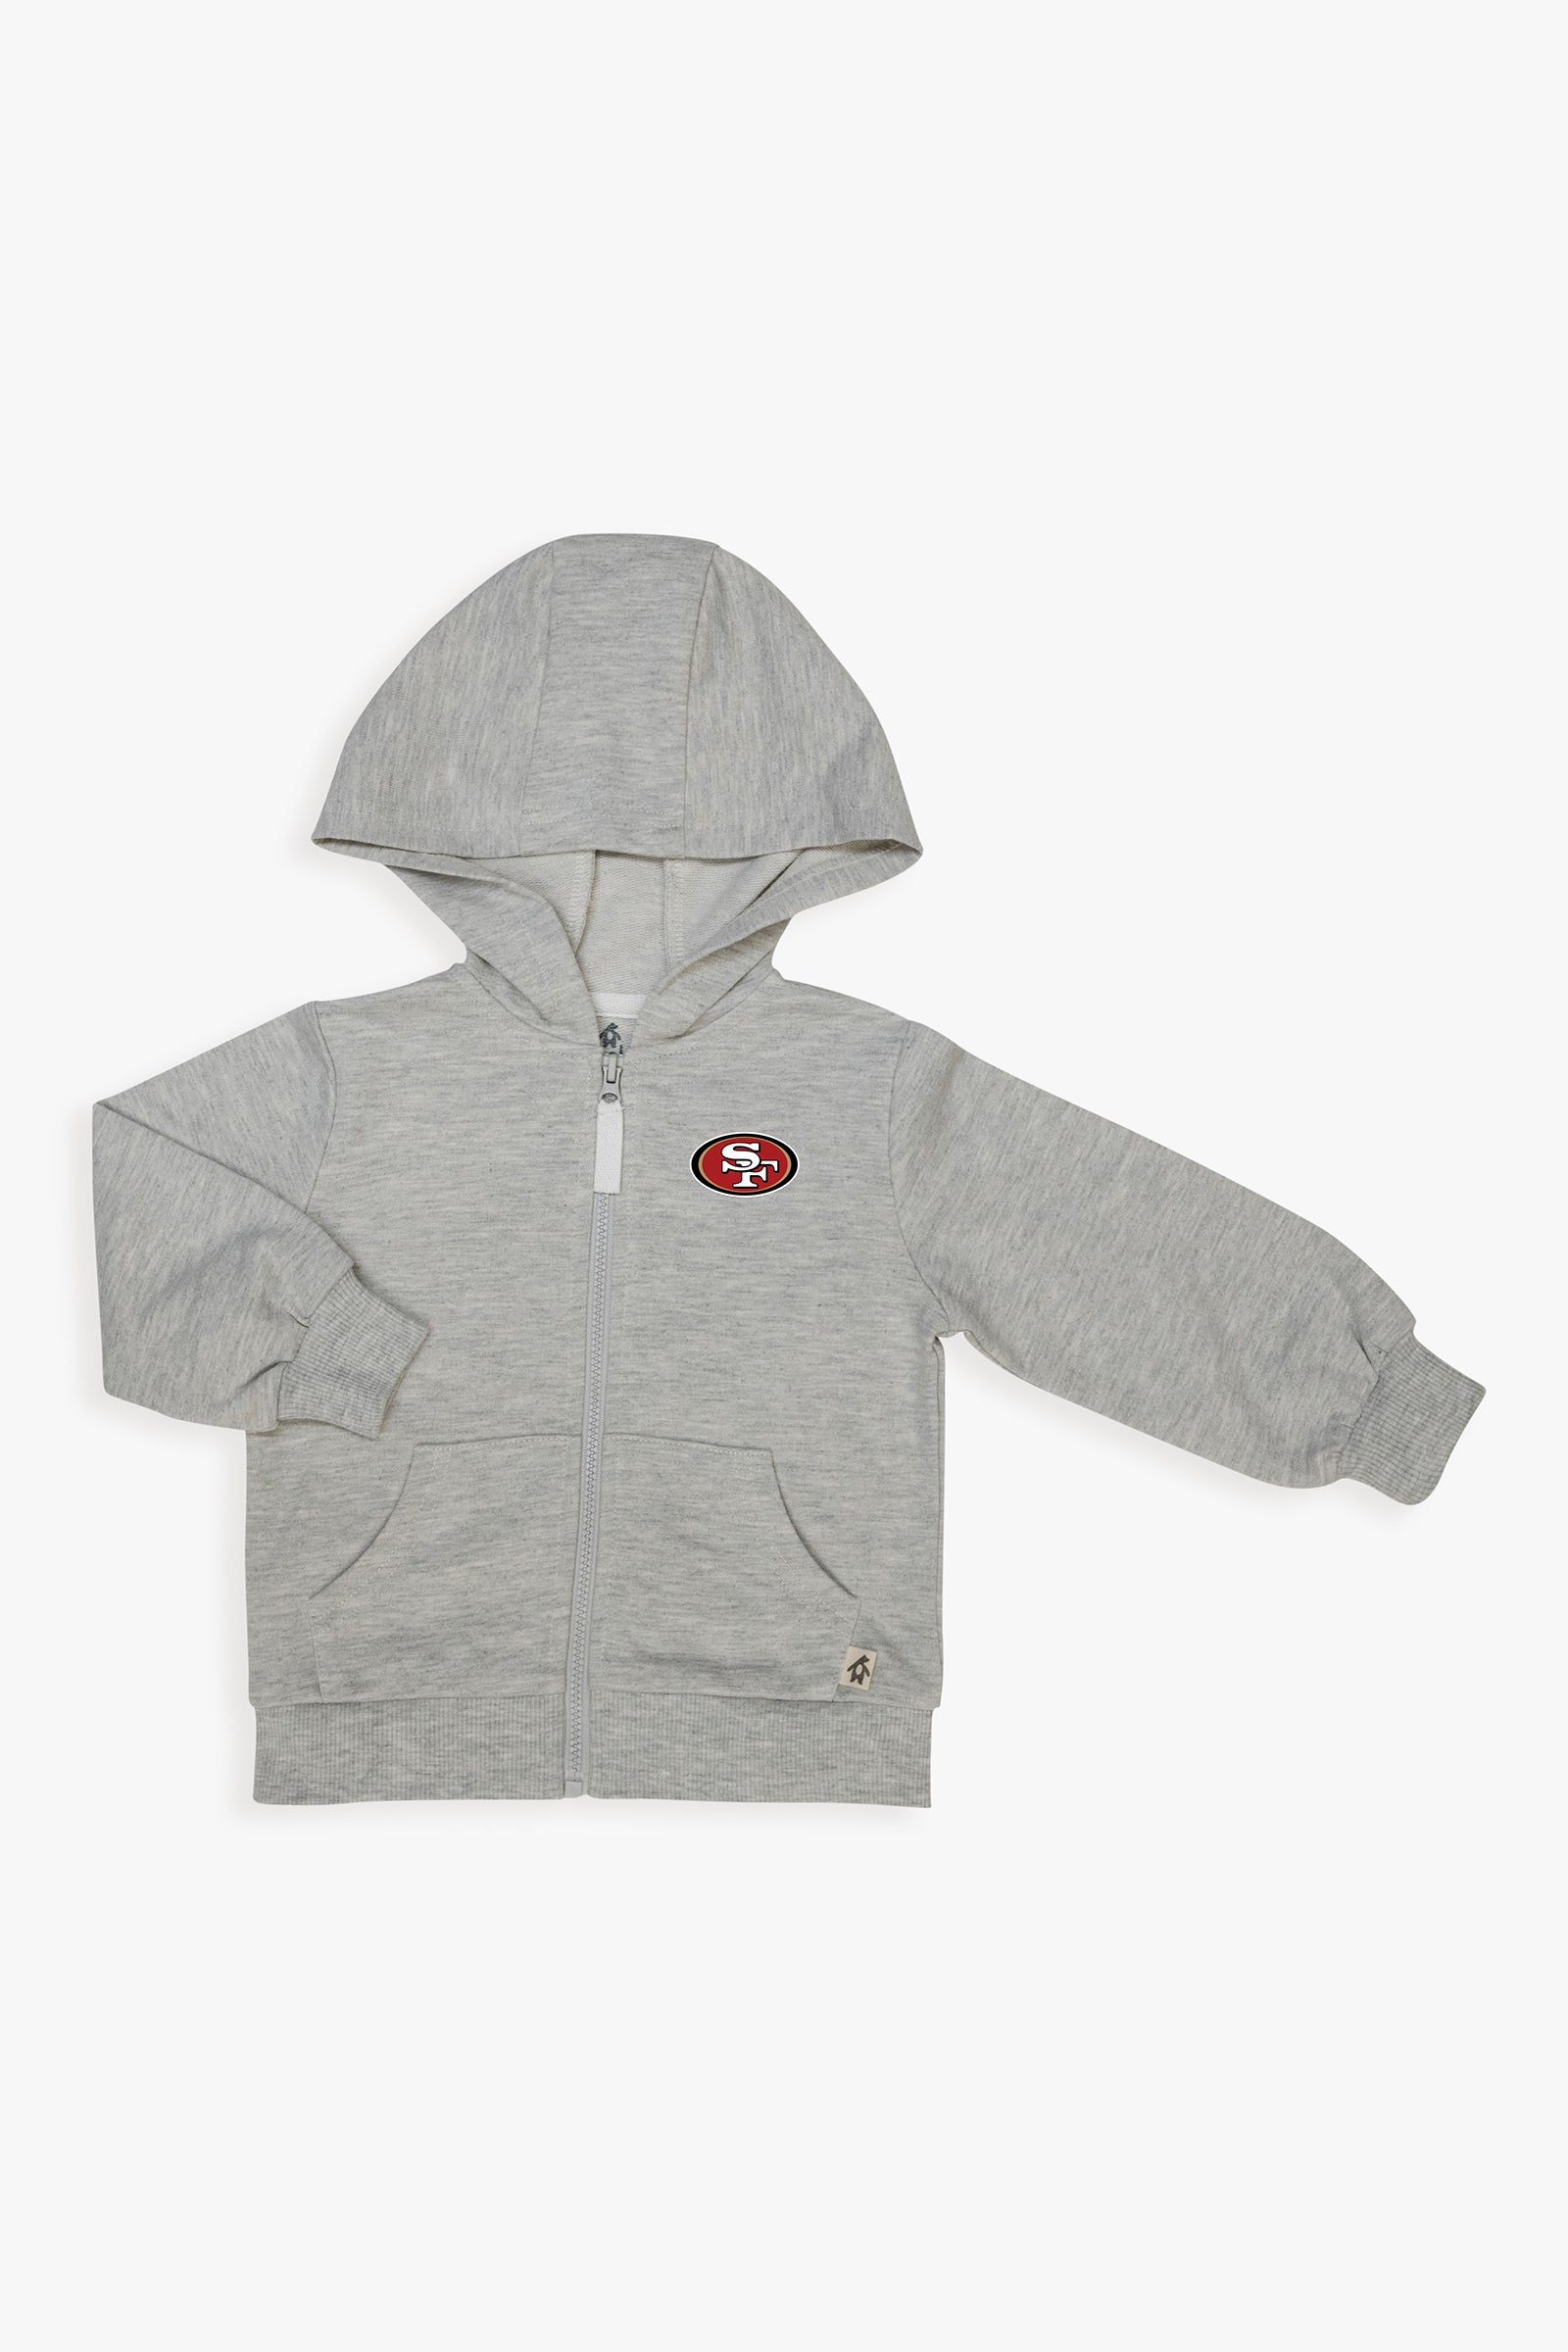 Baby Grey Logo NFL Hoodie French Team Football Terry Unisex Zip-Up Toddler